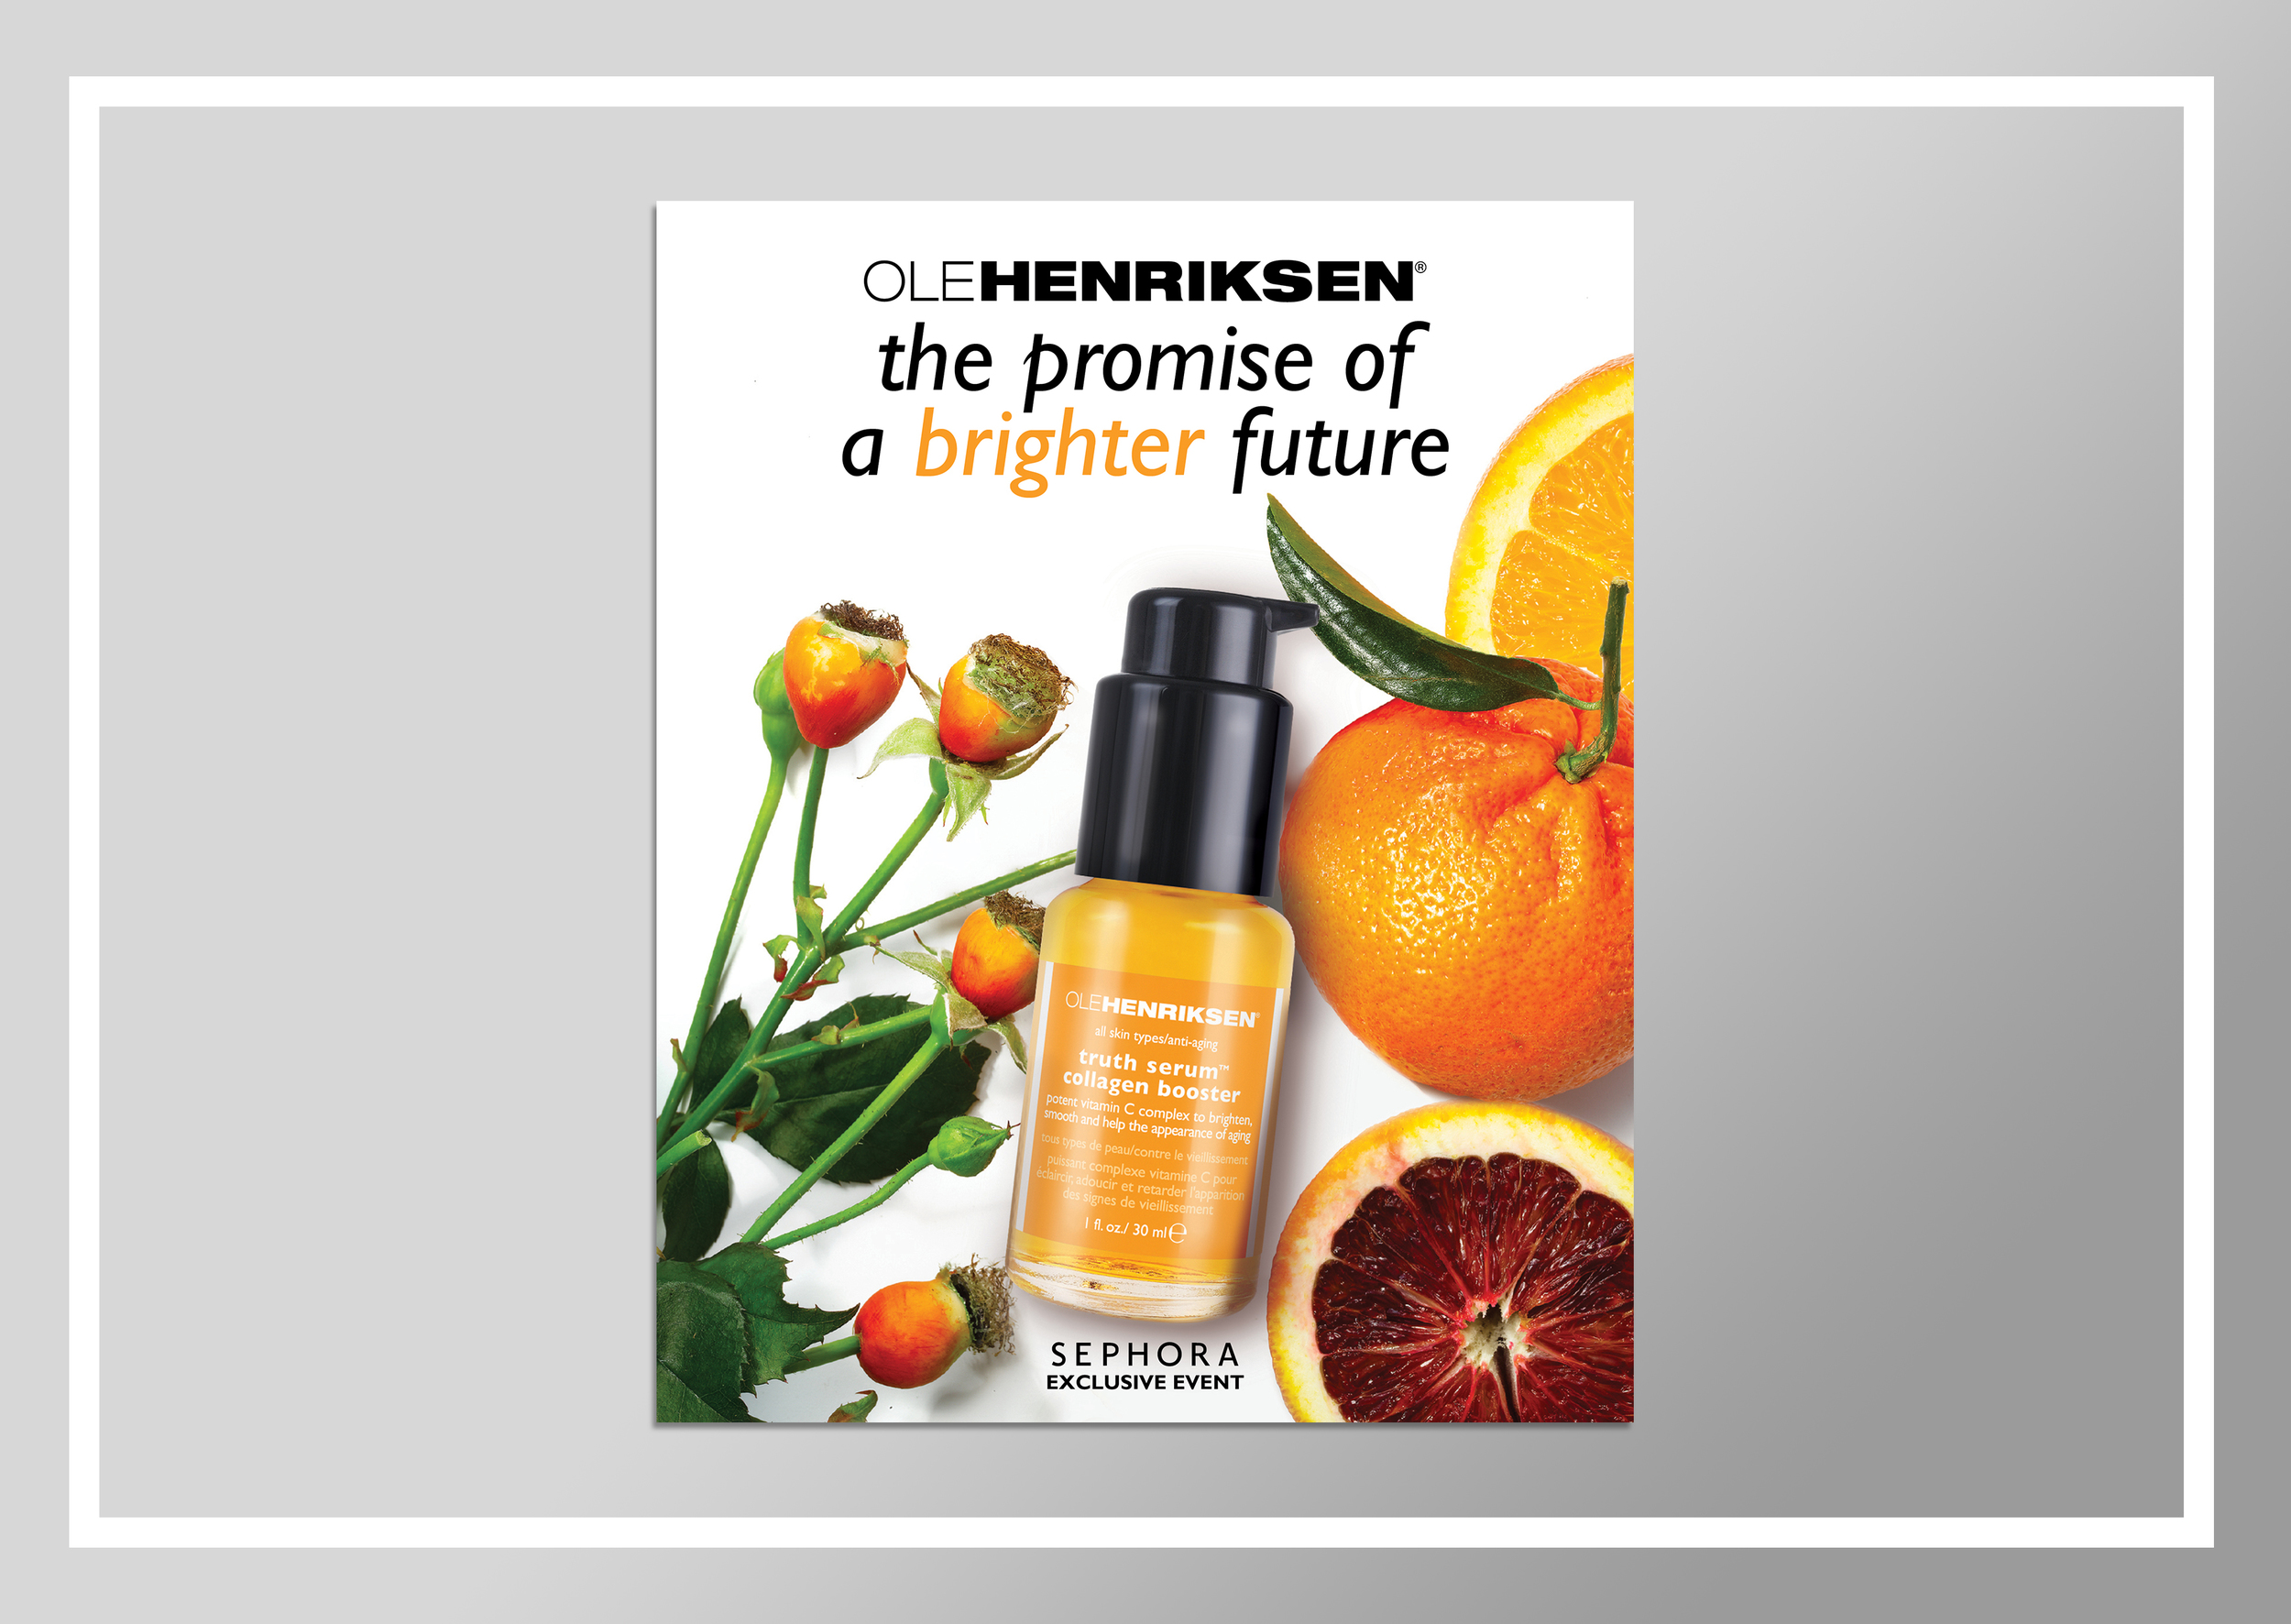  In-store graphic in Sephora for new product at Ole Henriksen 